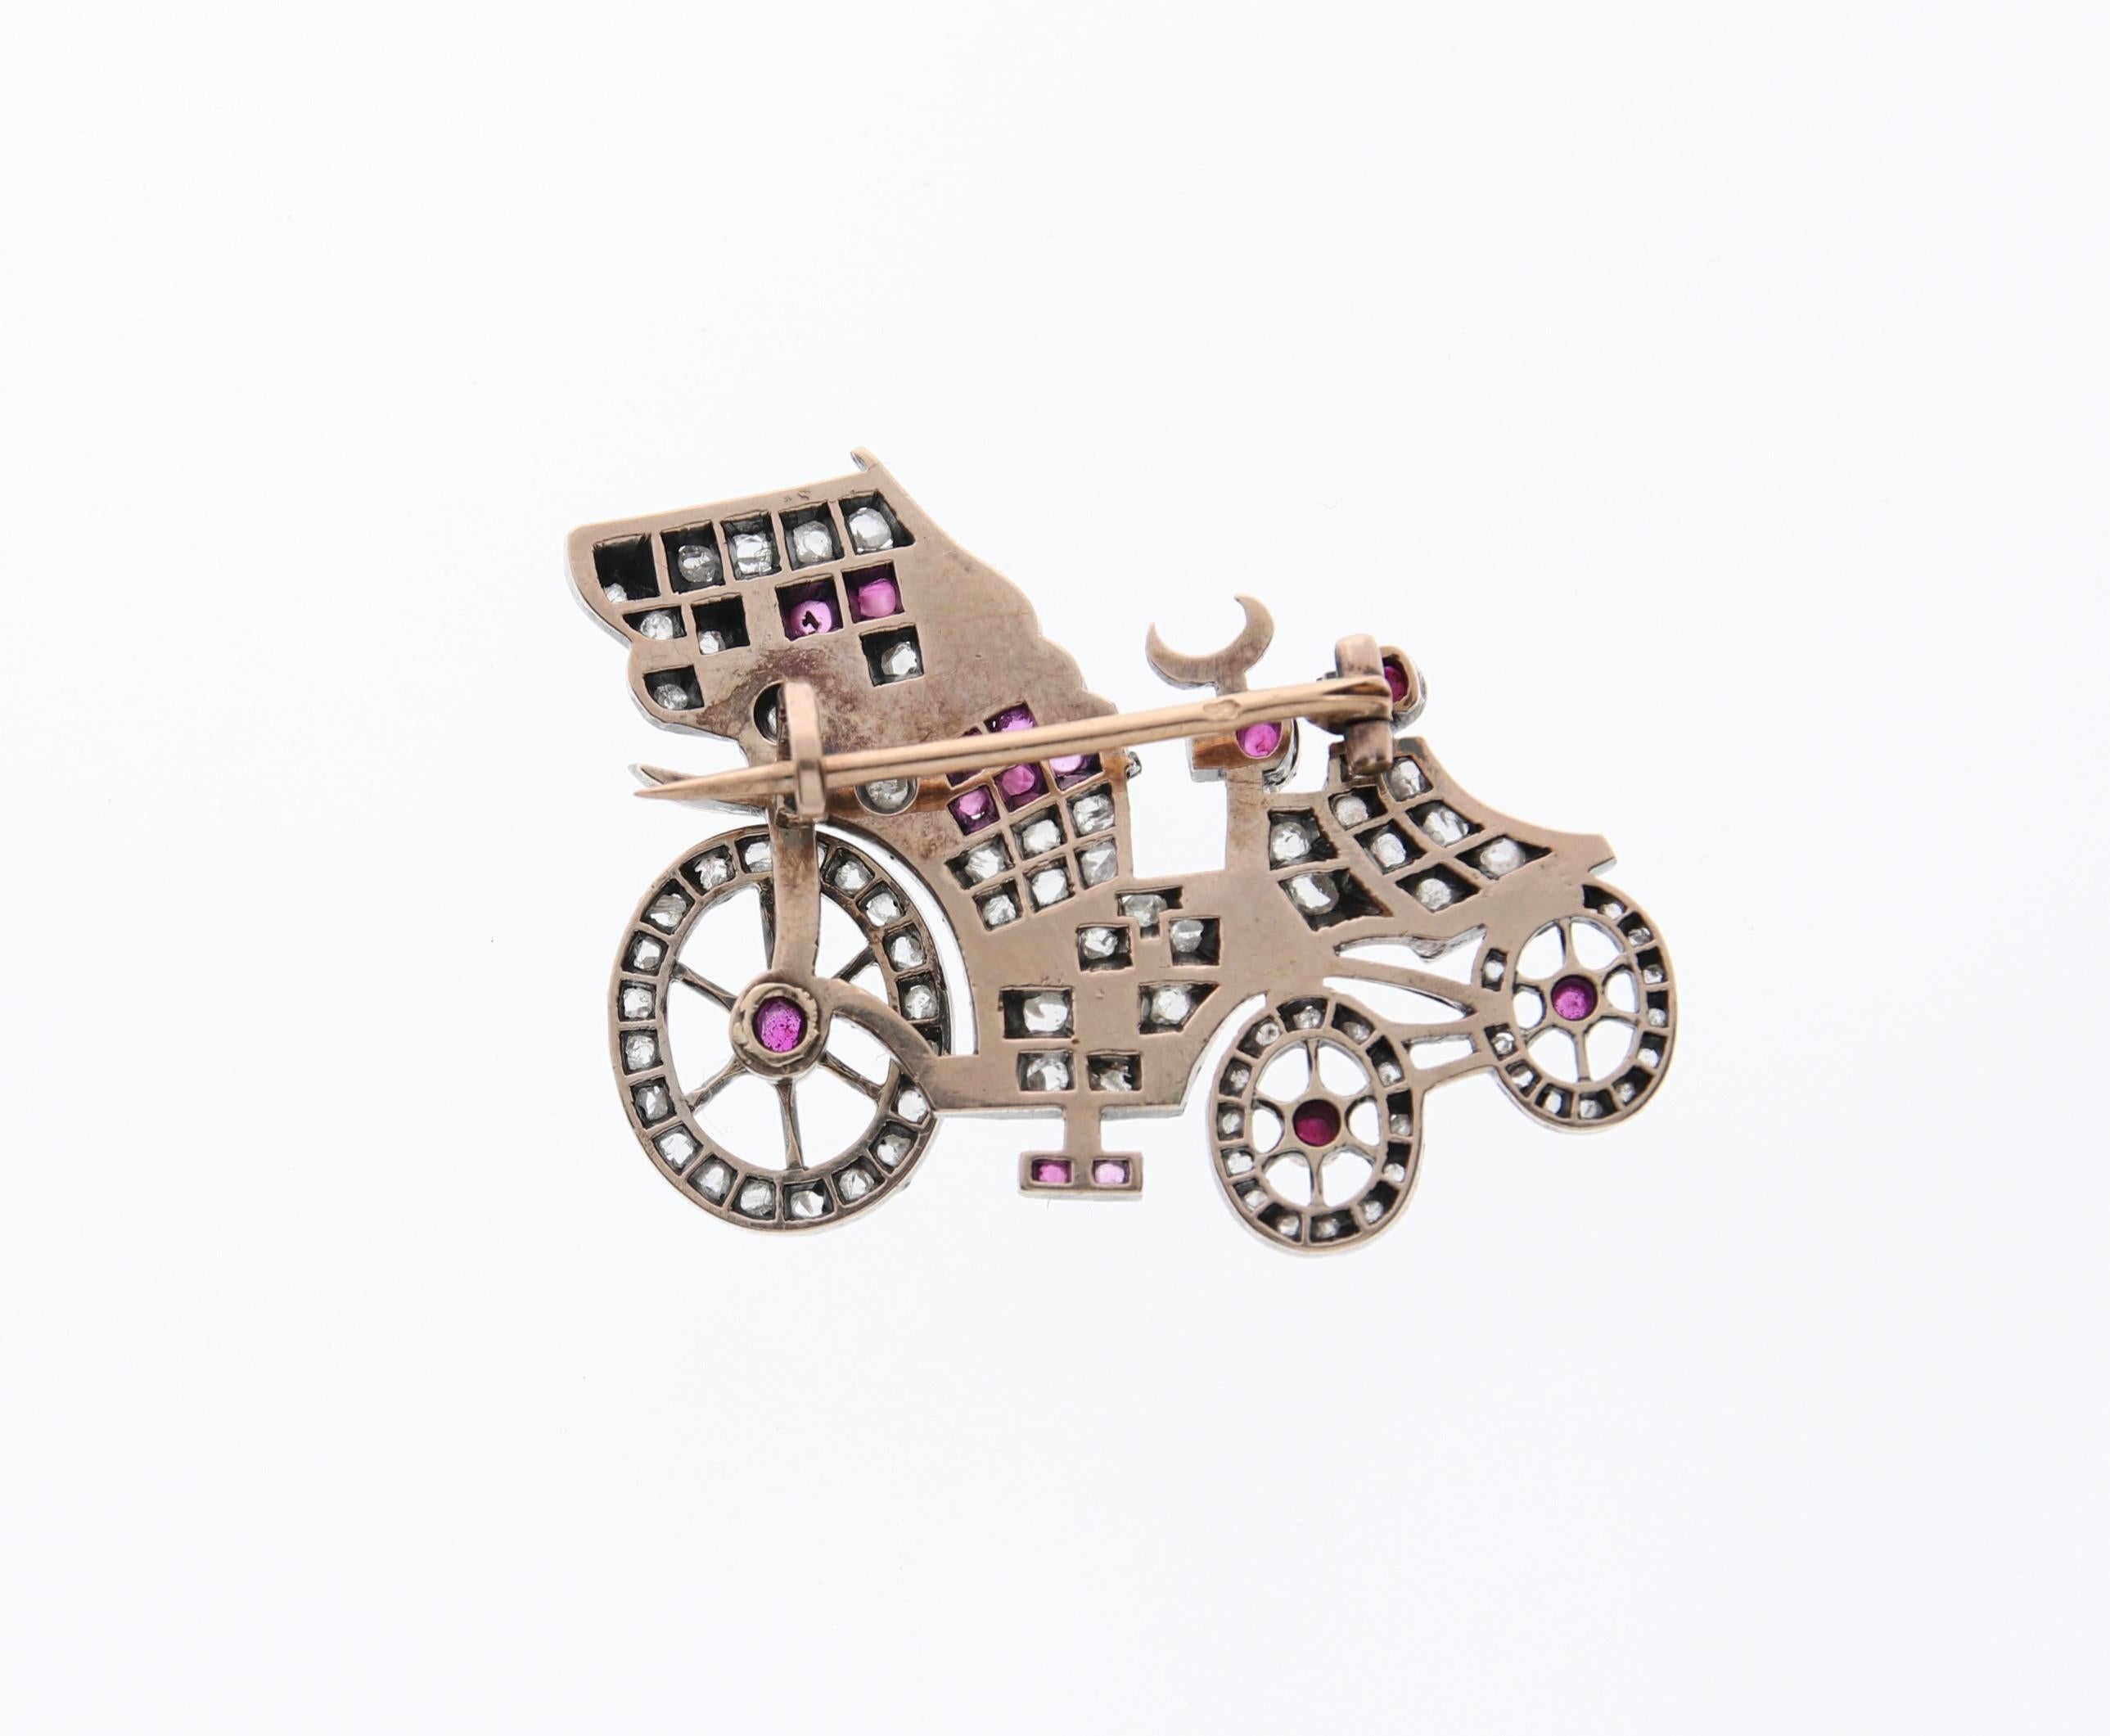 Detailed car carriage model ( e.g. Daimler or Aaglander) in silver on 18 KT yellow gold with rose cut diamonds and rubies cabochons. It has a french eagle head hallmark. 